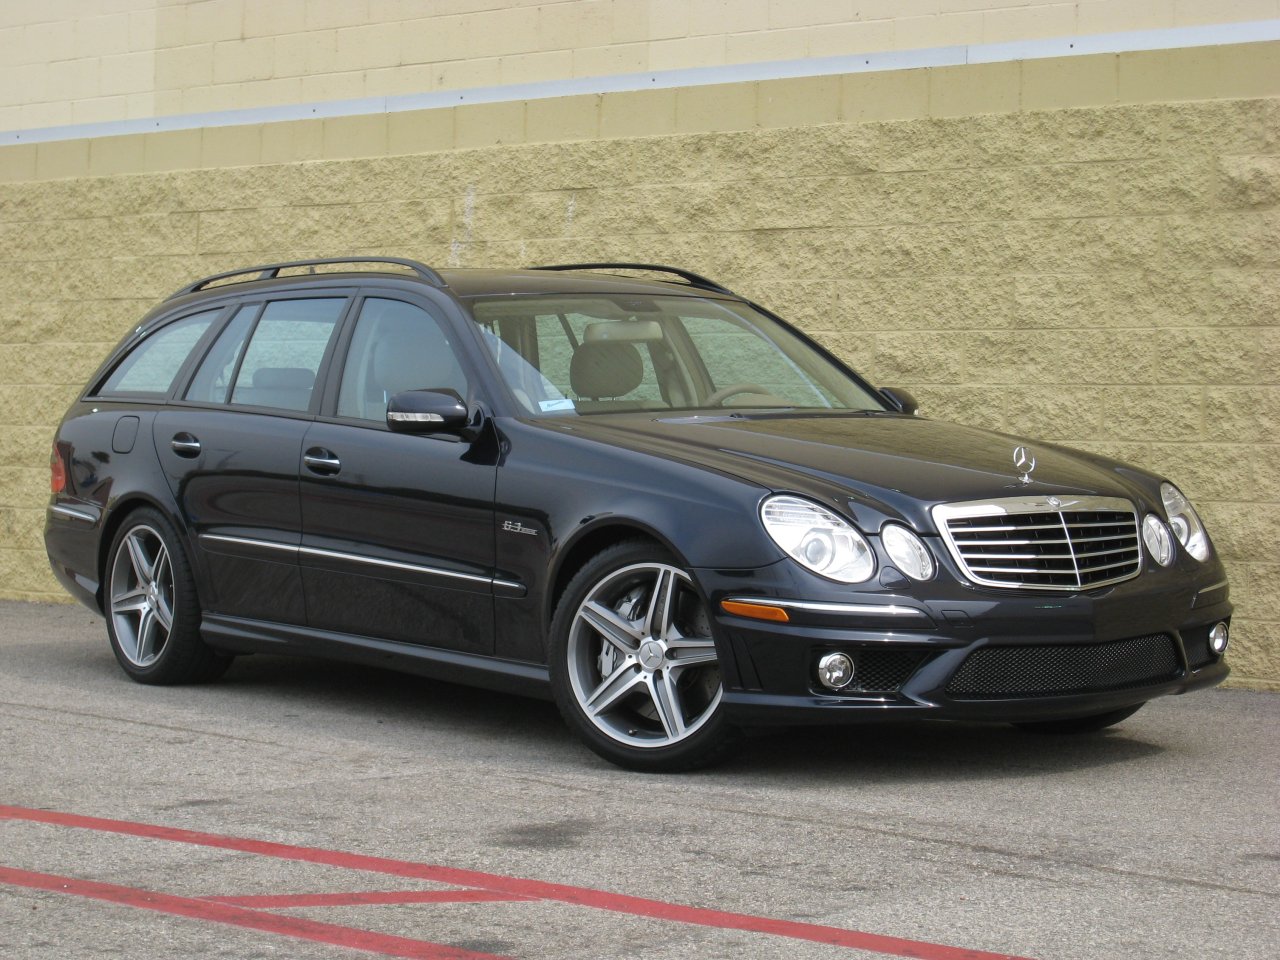 Mercedes Benz E Class 07 Review Amazing Pictures And Images Look At The Car